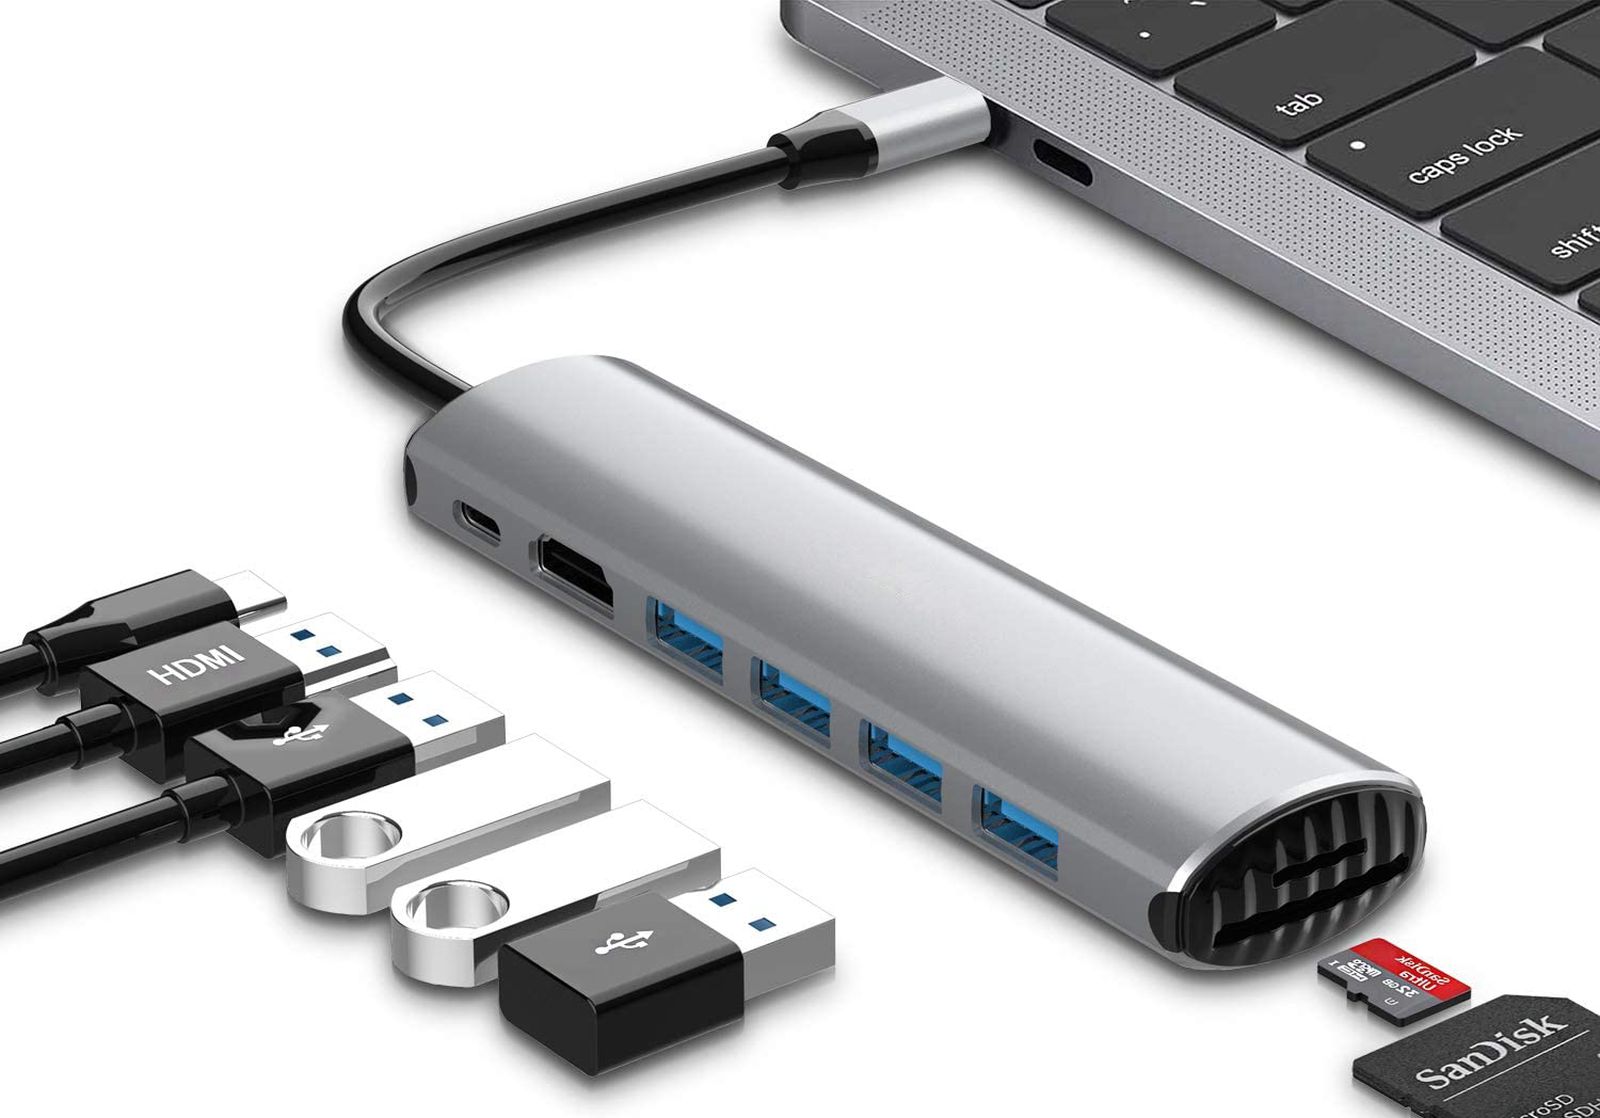 macOS Monterey Users Report Connectivity Issues With USB Hubs - MacRumors